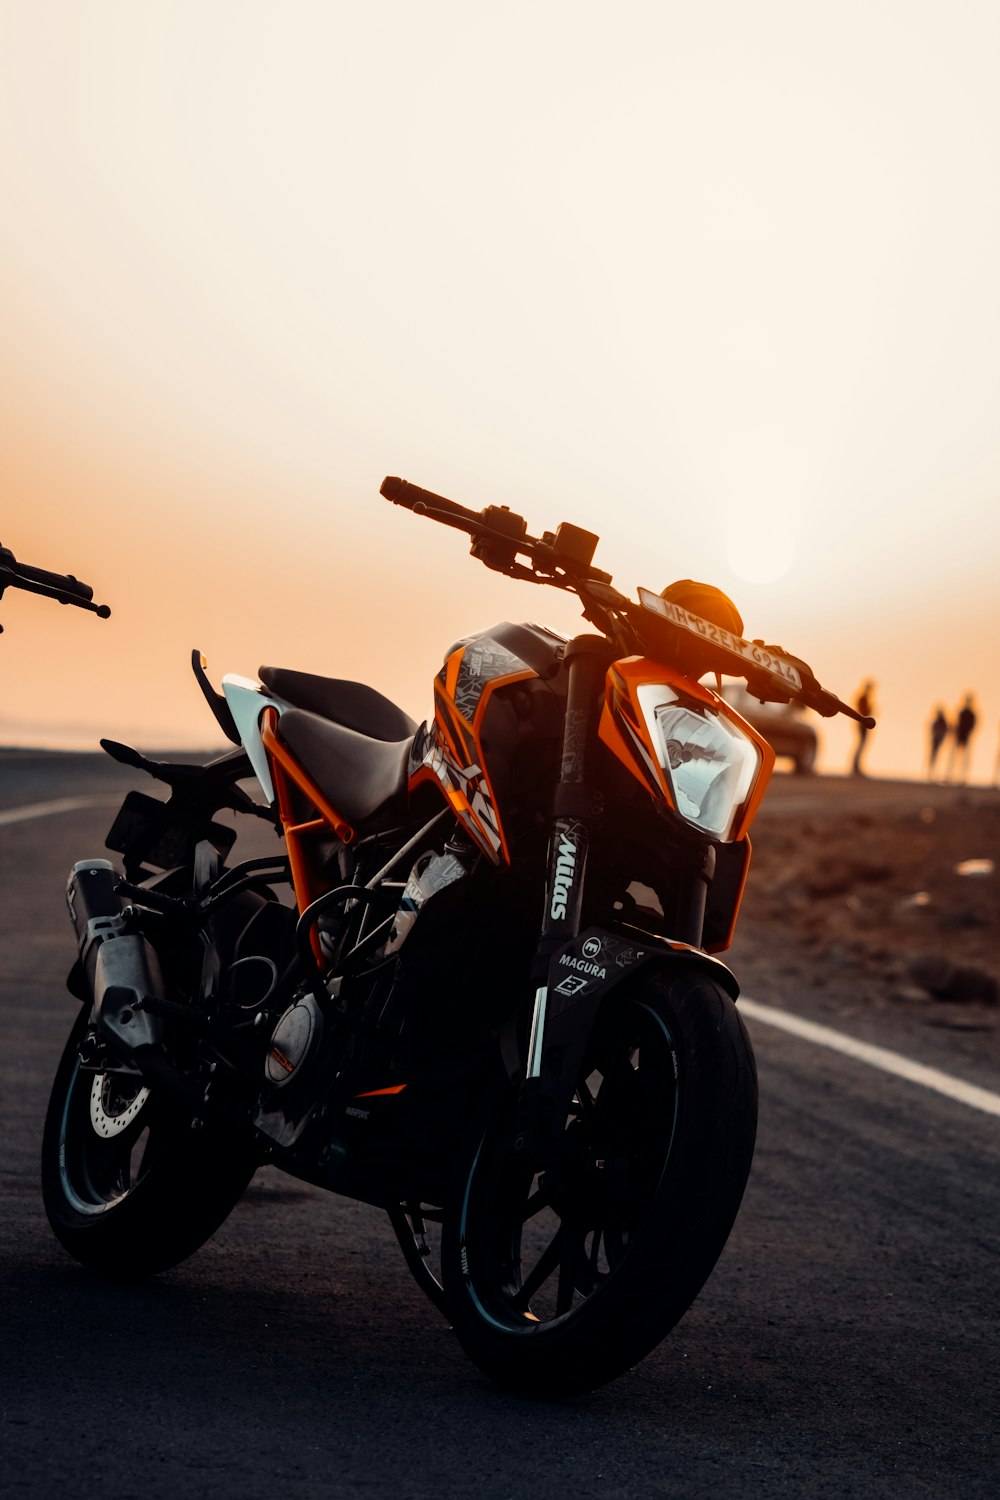 black and red motorcycle on road during sunset